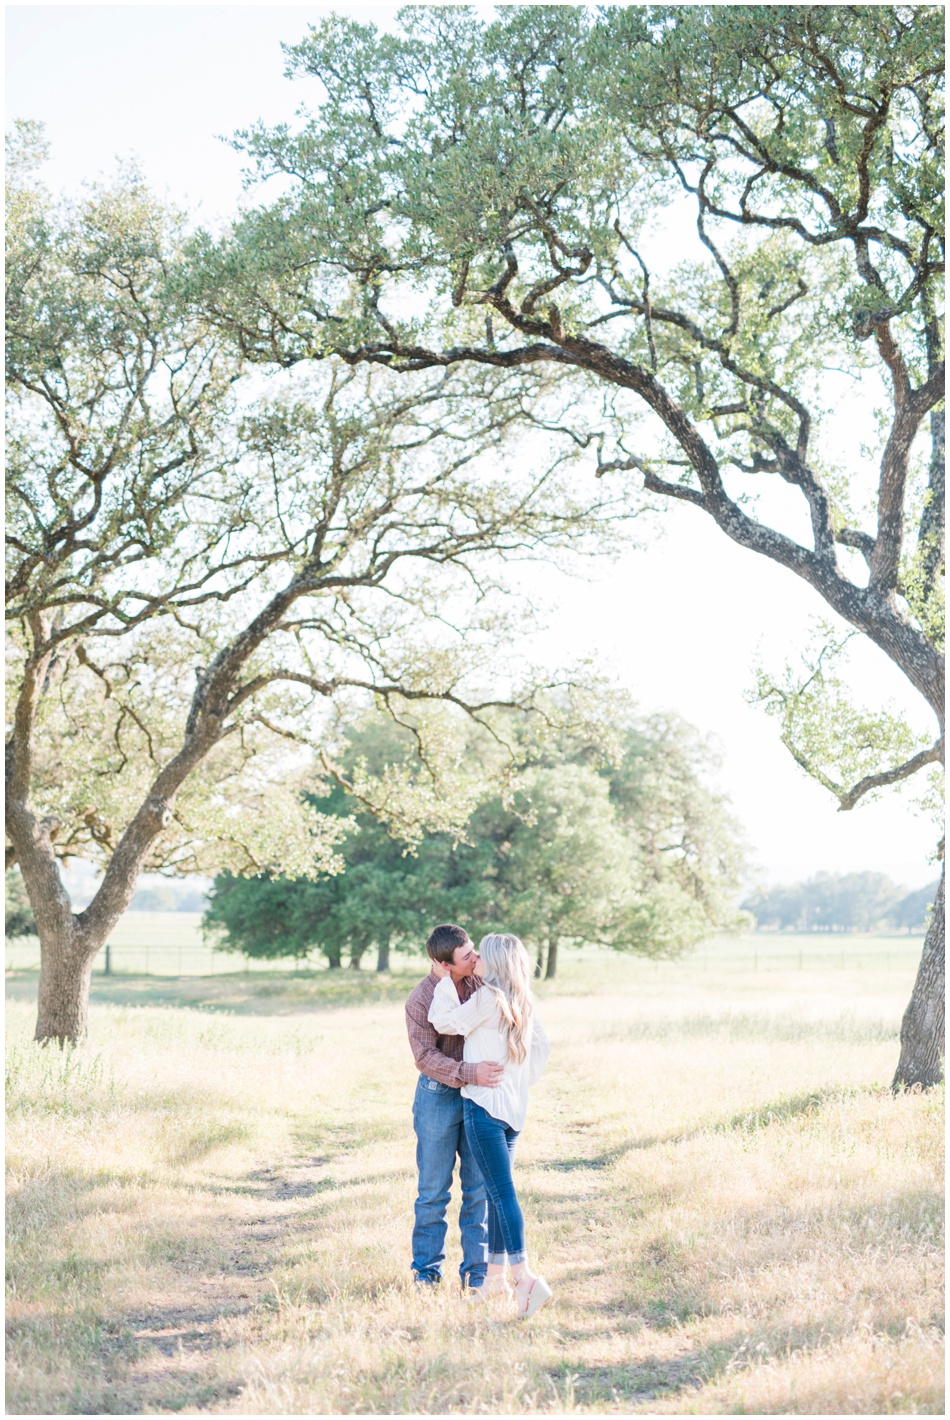 Engagement Photos on private ranch in Texas